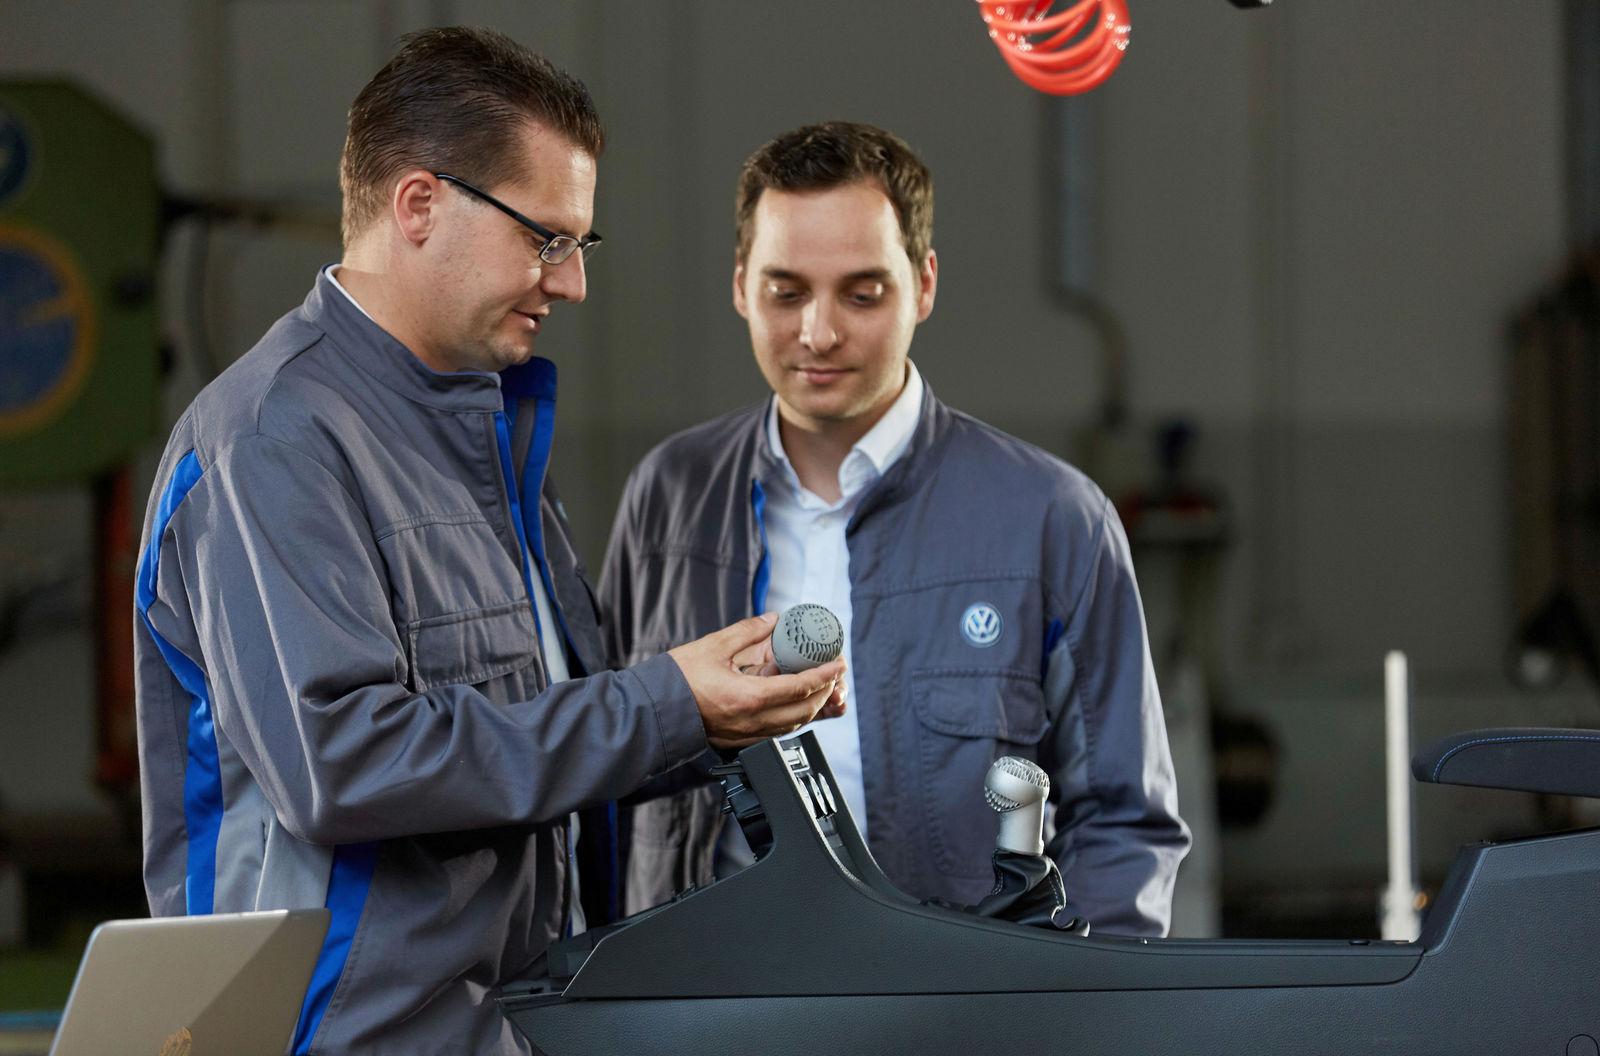 READY FOR MASS PRODUCTION: VOLKSWAGEN USES THE LATEST 3D PRINTING PROCESS FOR PRODUCTION